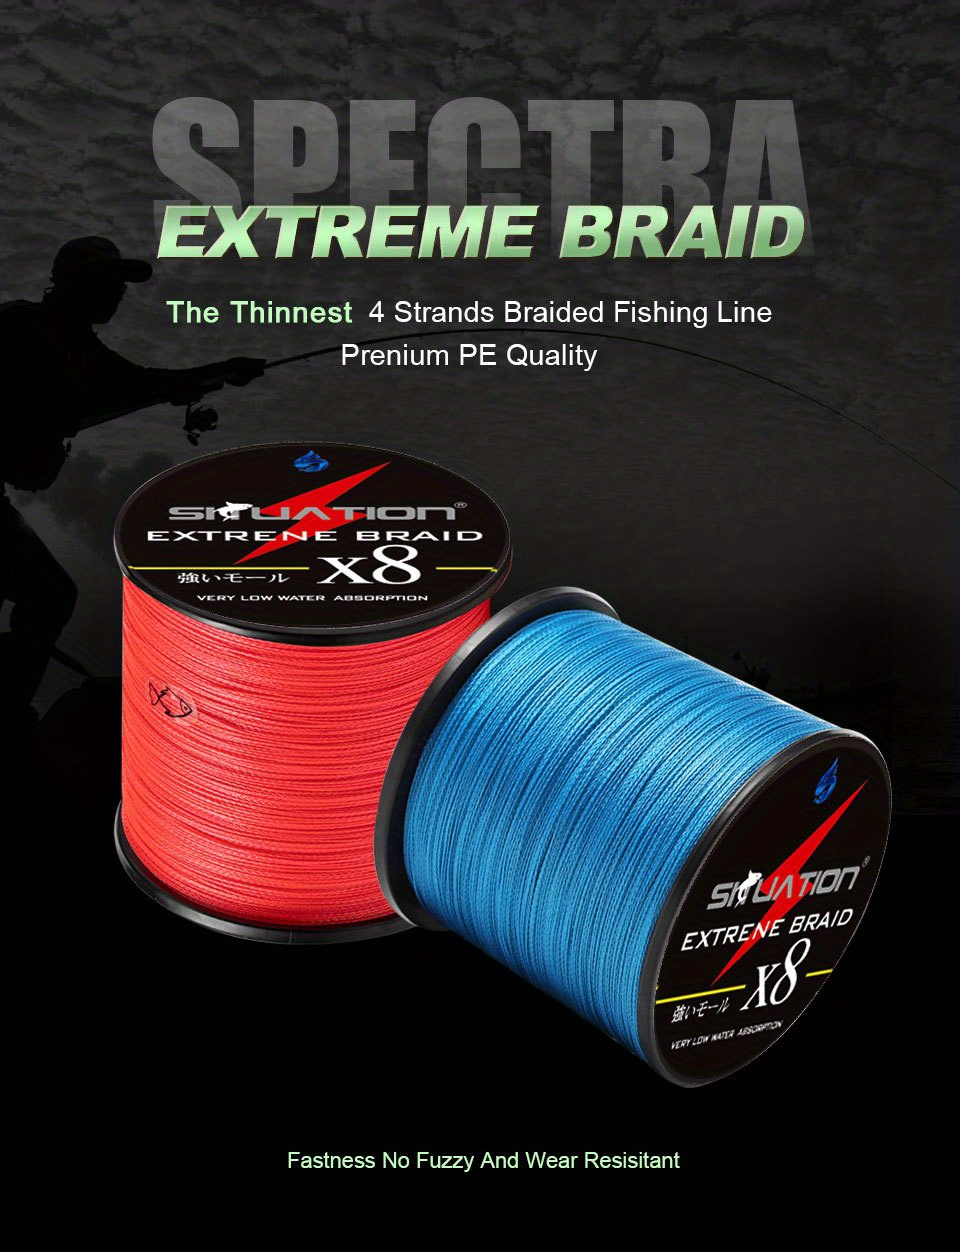 Find More Fishing Lines Information about Gaining Braided Line 8 Strands Braided  Fishing line 500m Multi Color Super Strong Ja…